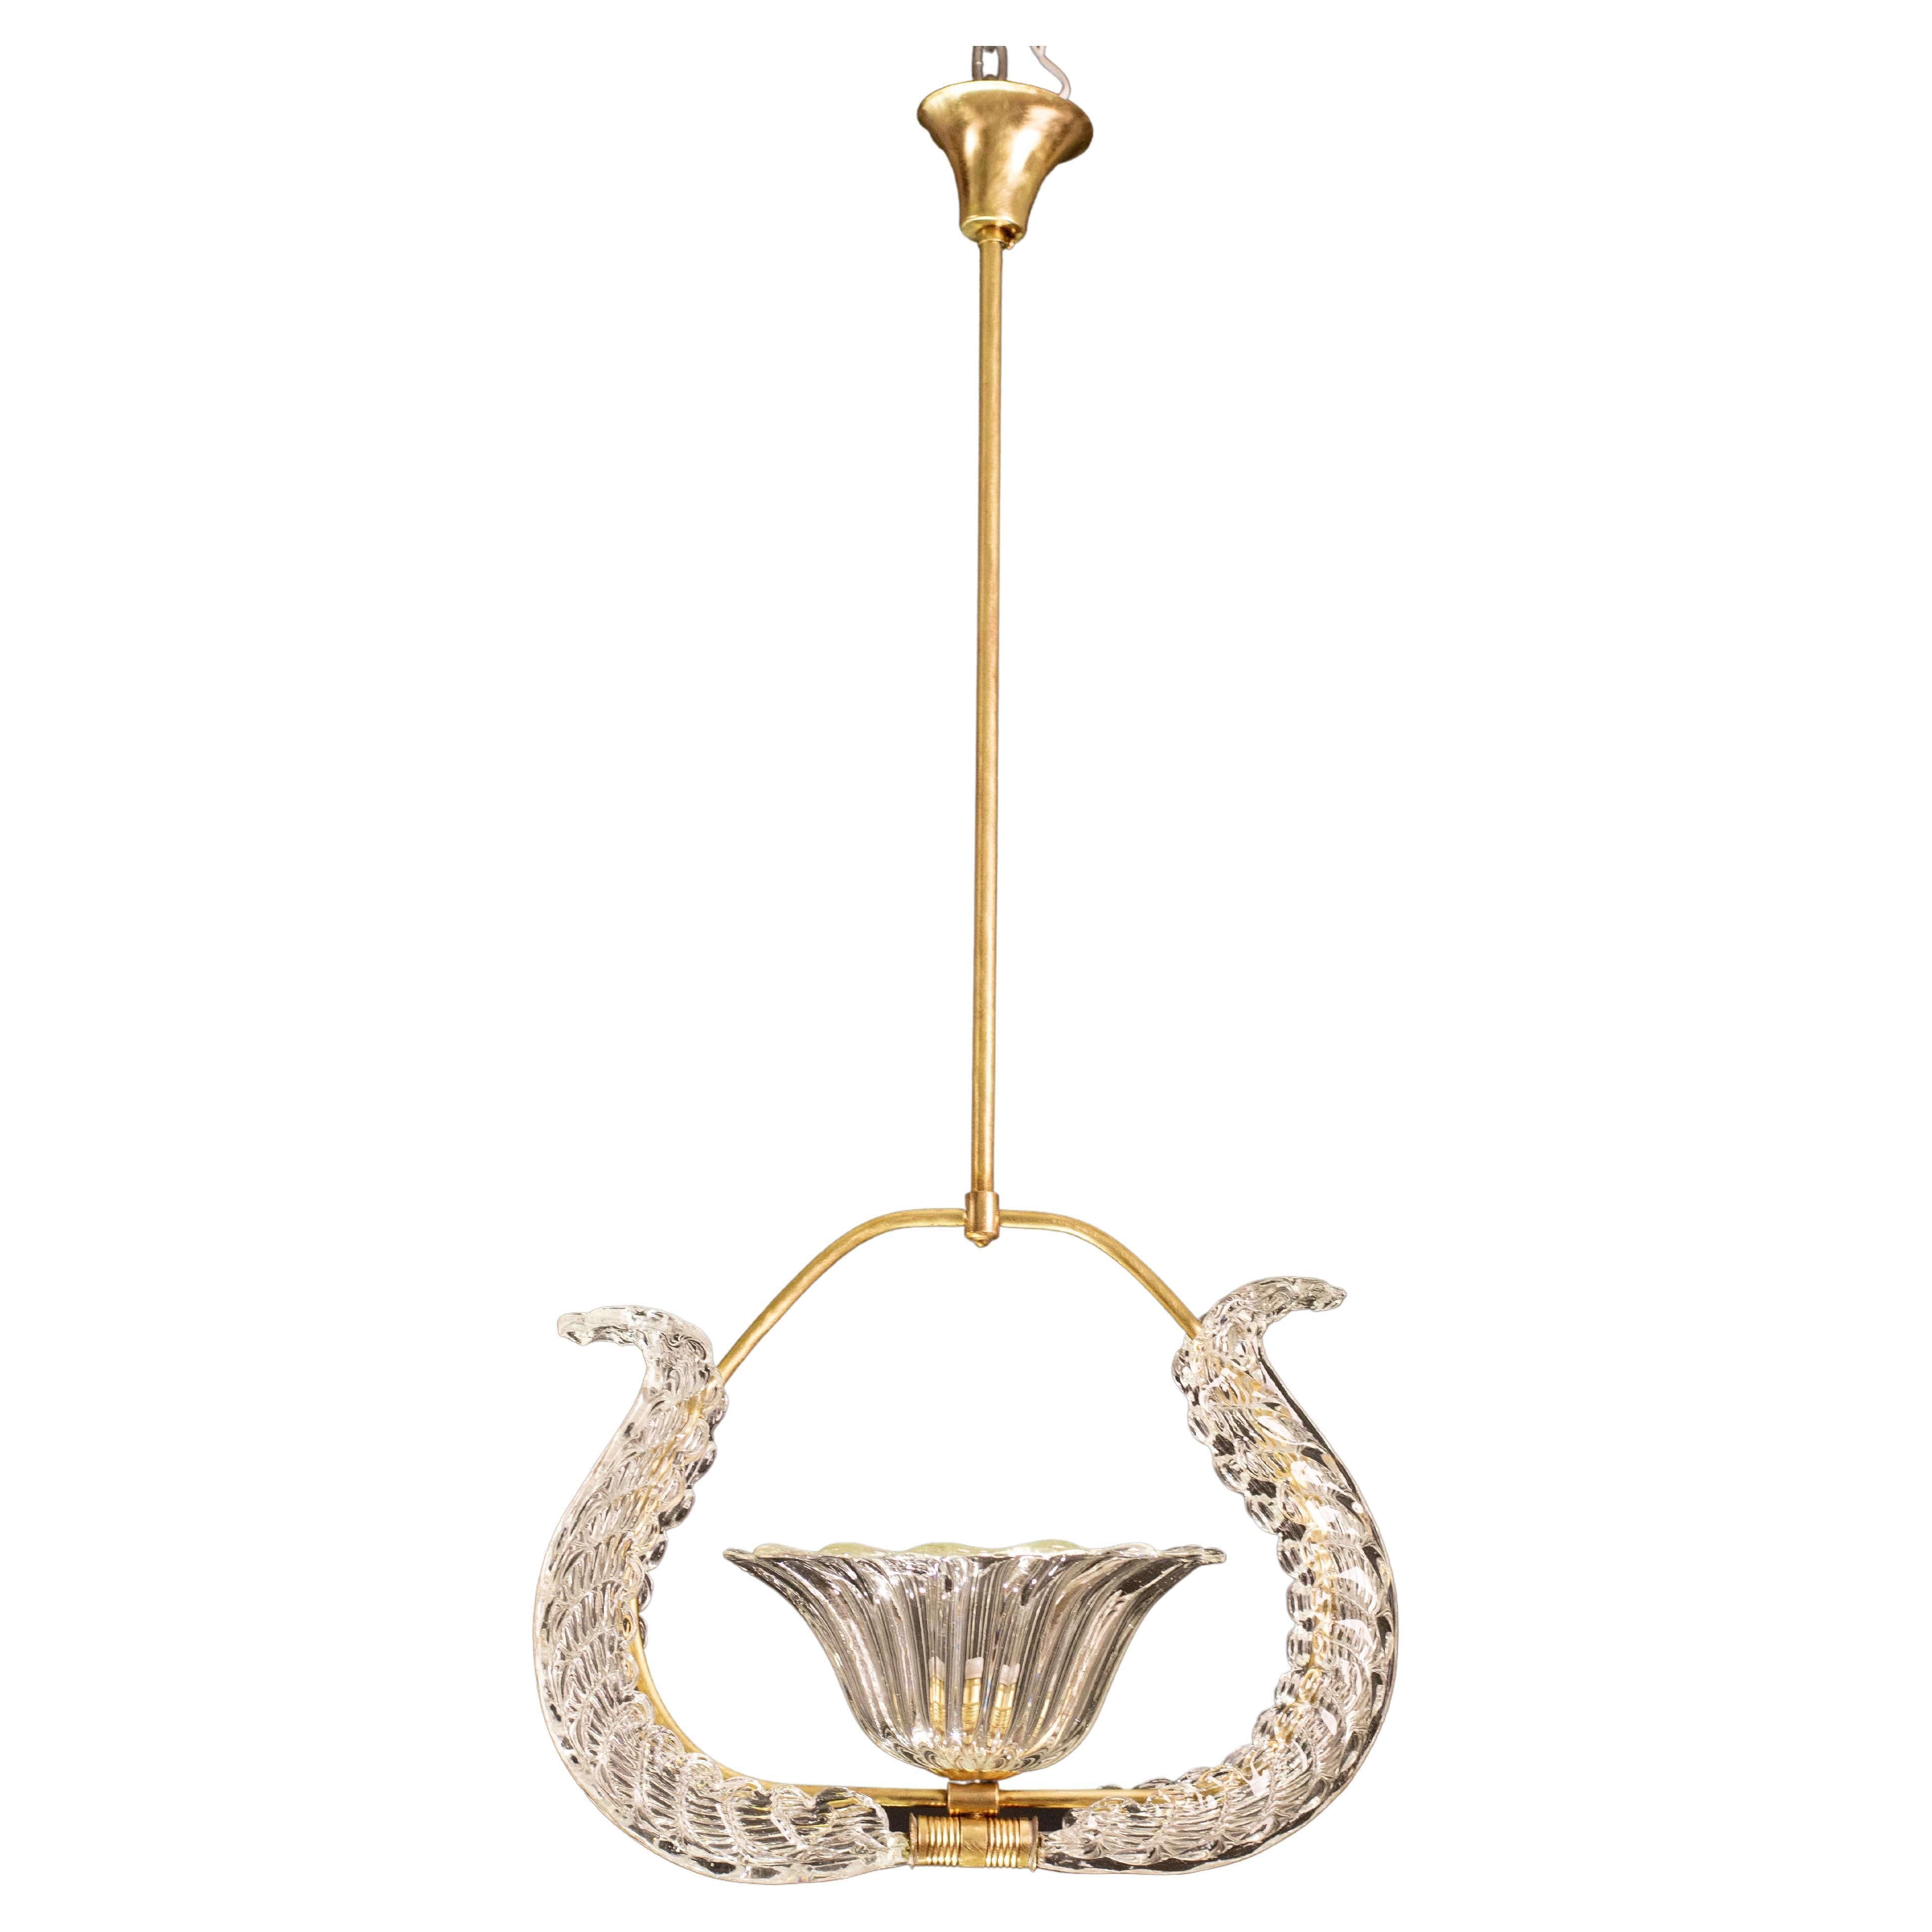 Charming Art Decò Barovier and Toso Chandelier, 1940s For Sale